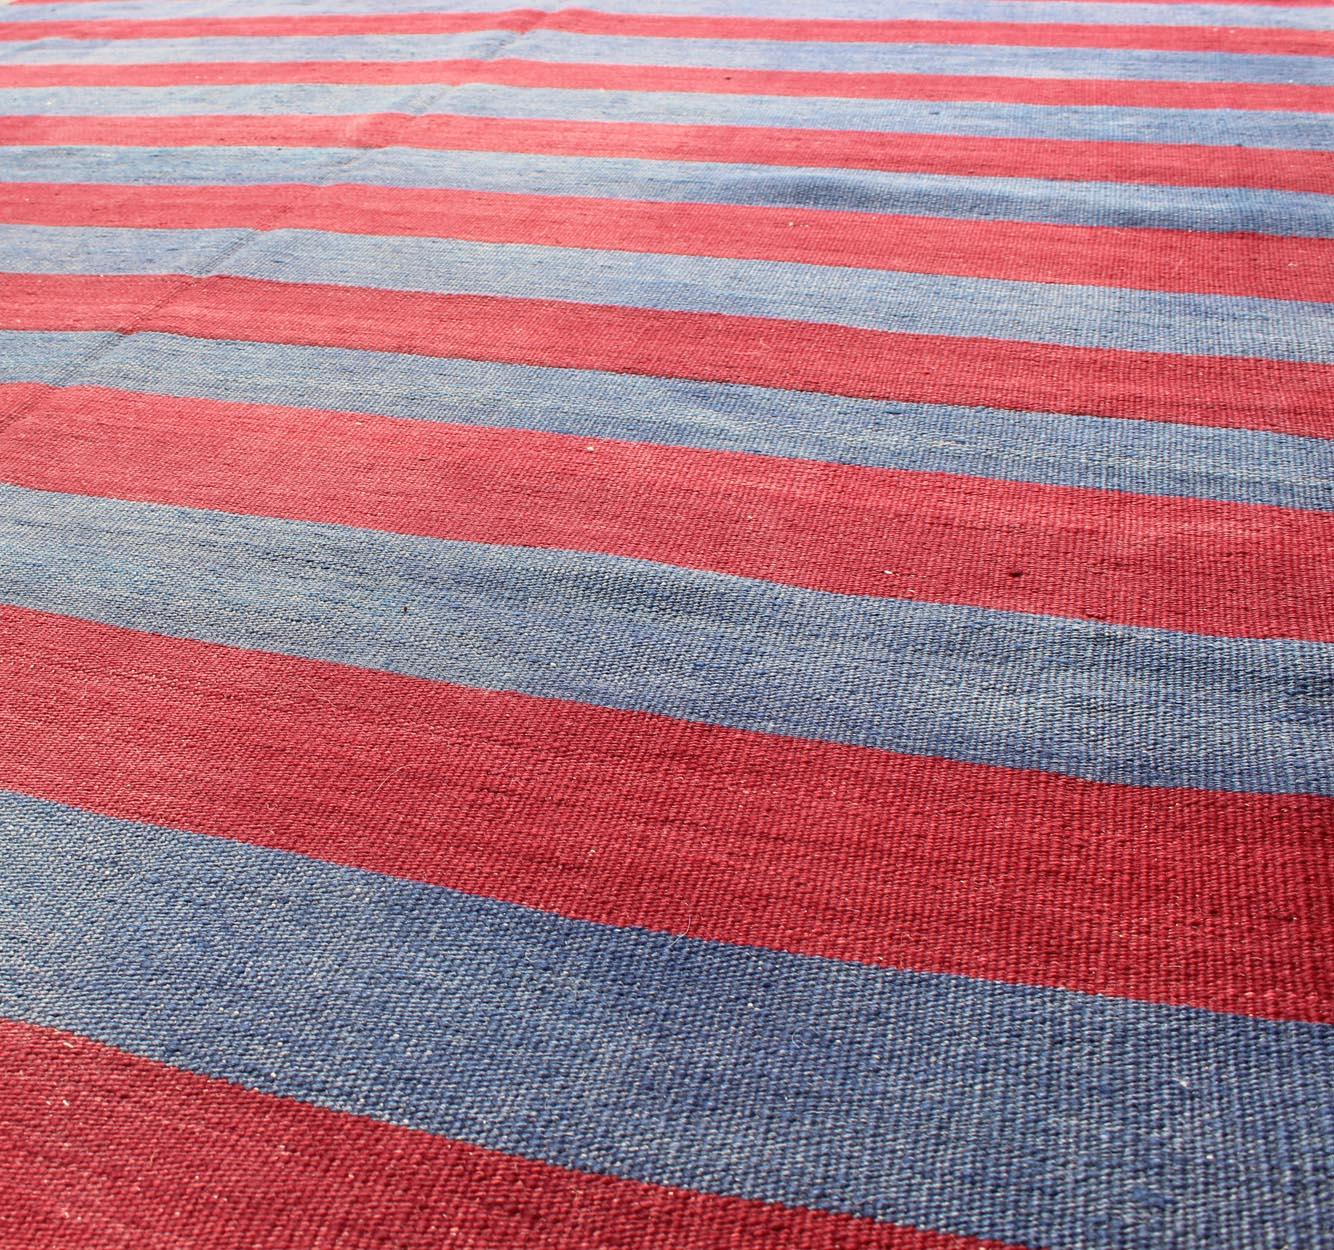 Wool Vintage Striped Turkish Kilim with Casual Modern Design in Red and Blue For Sale